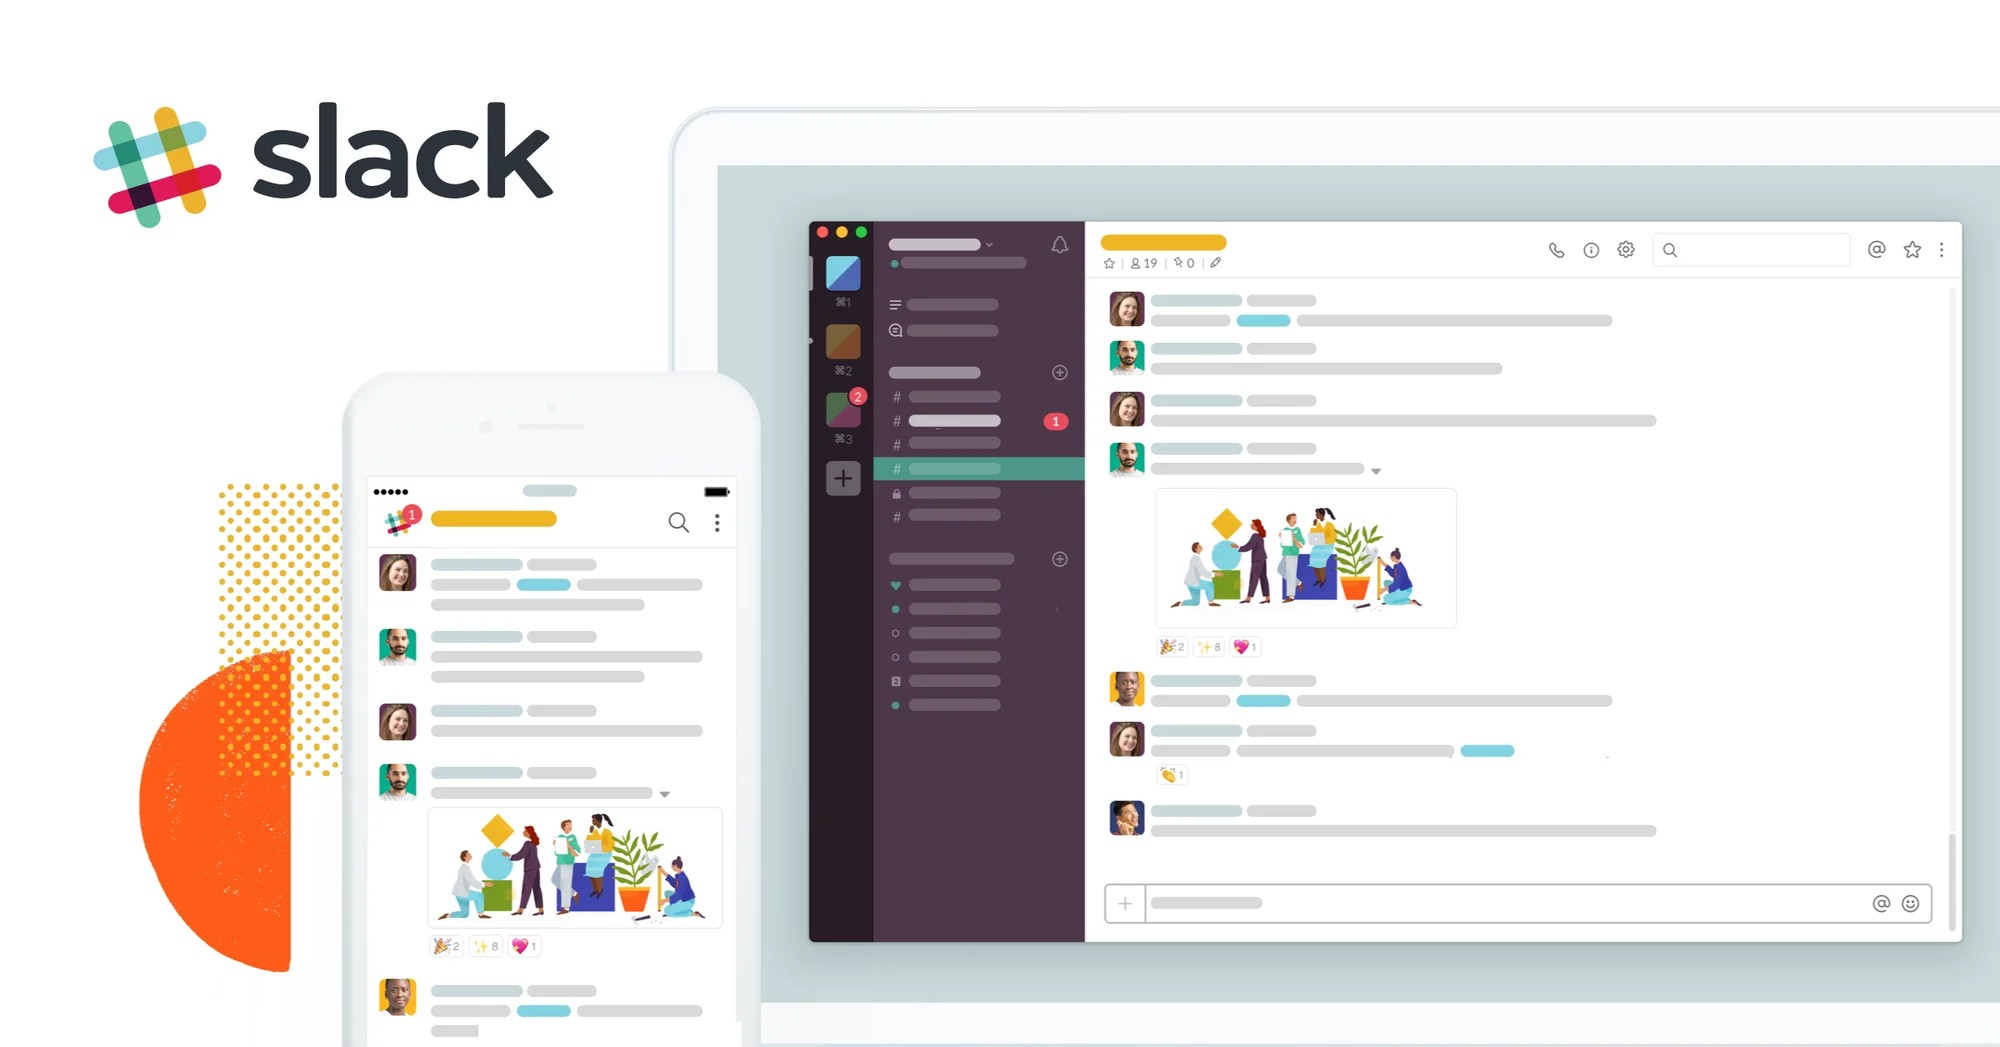 Slack - The best way to collaborate and work together